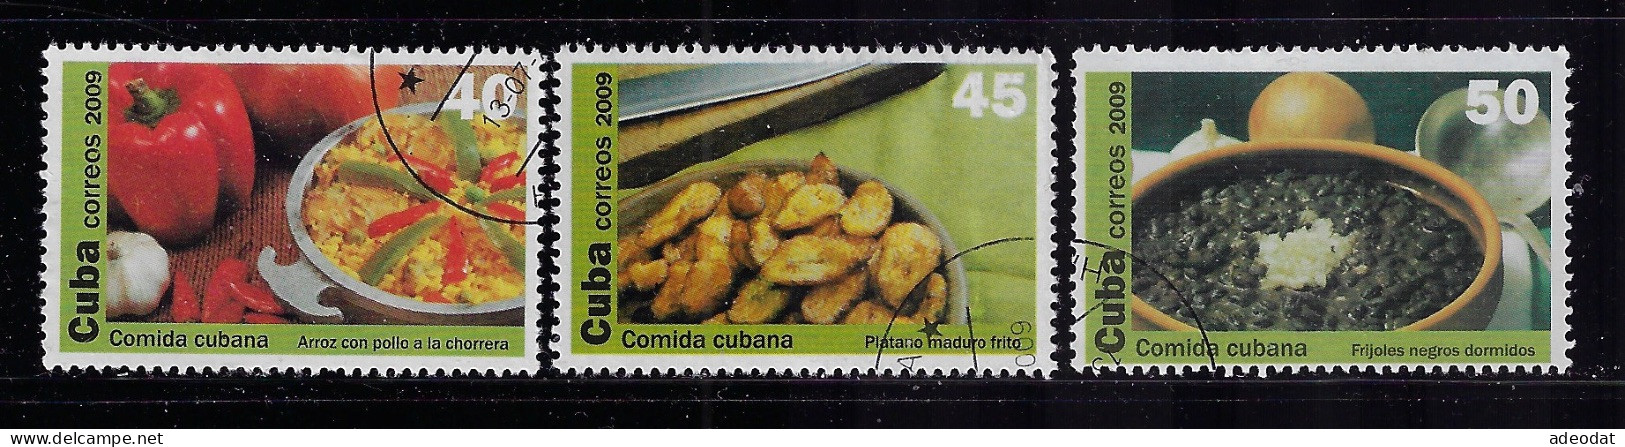 CUBA 2009 STAMPWORLD 5306-5308 CANCELLED - Used Stamps